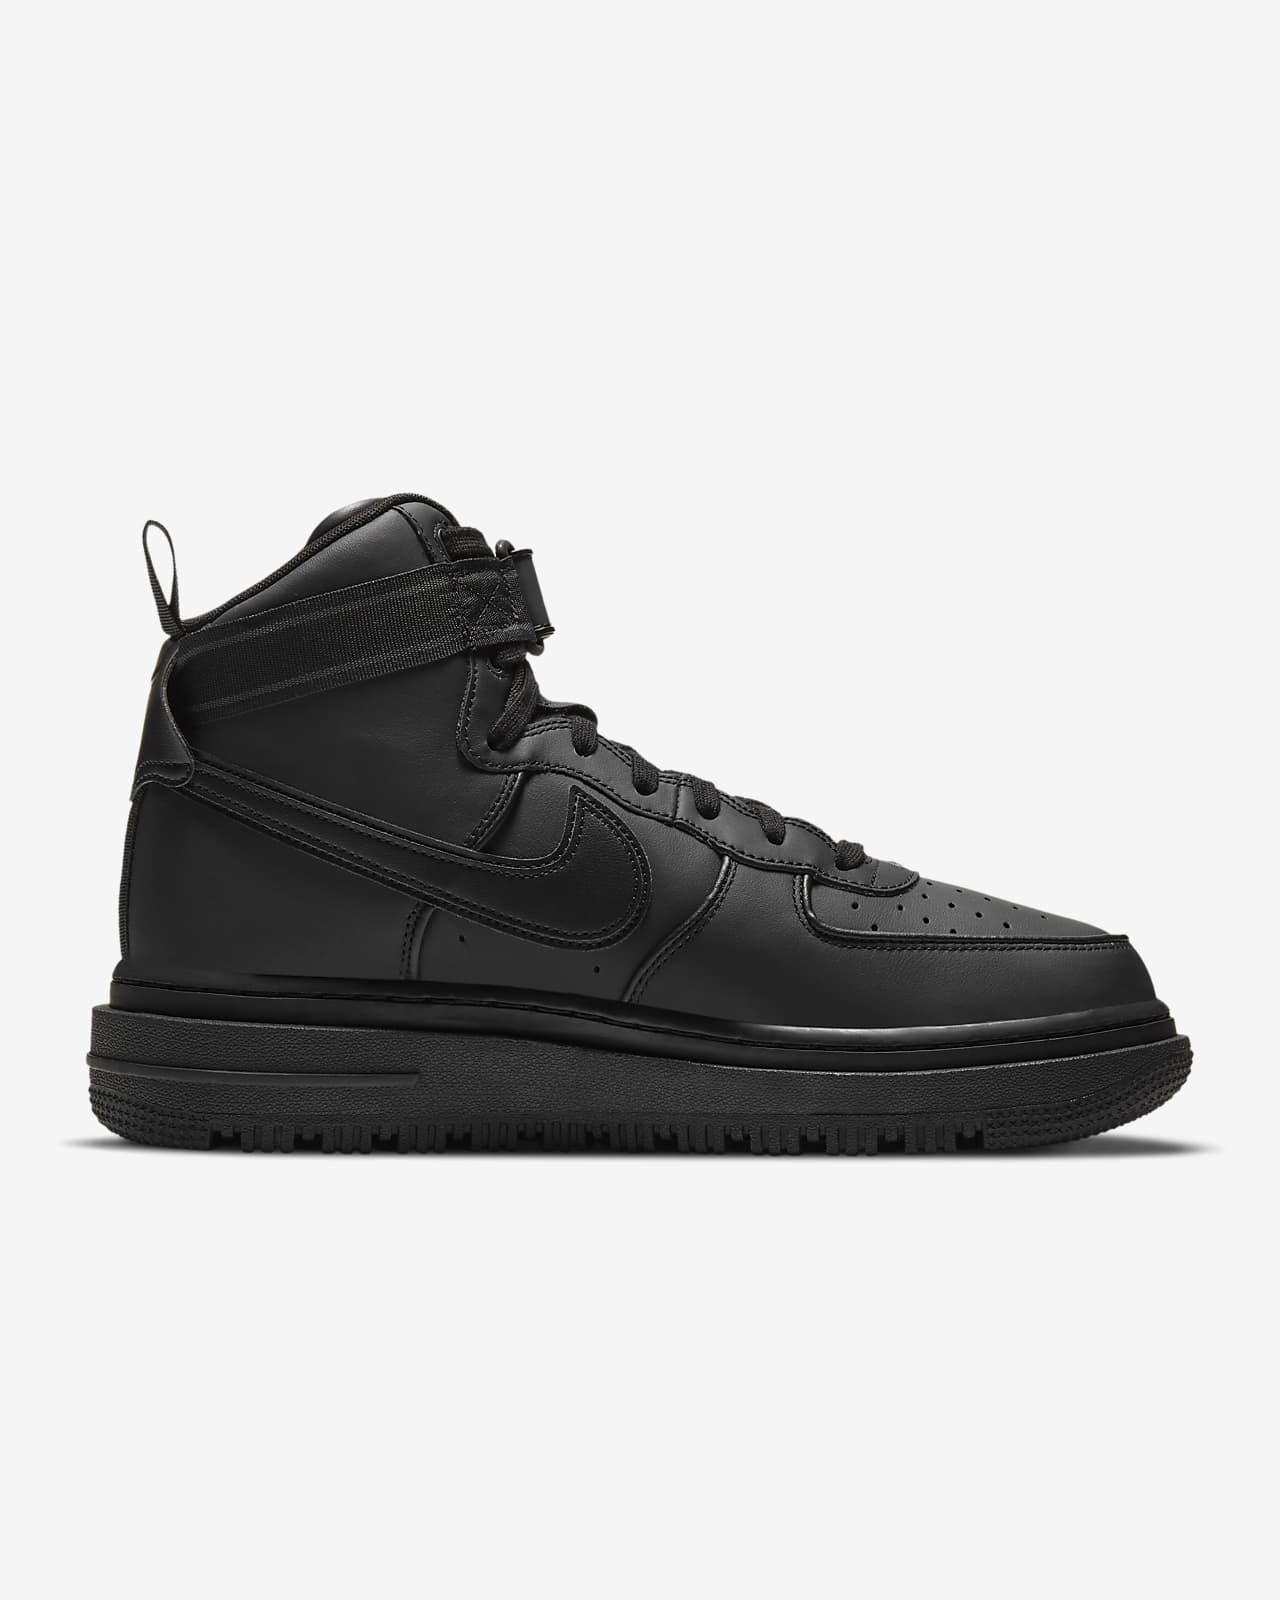 air force one nike boots